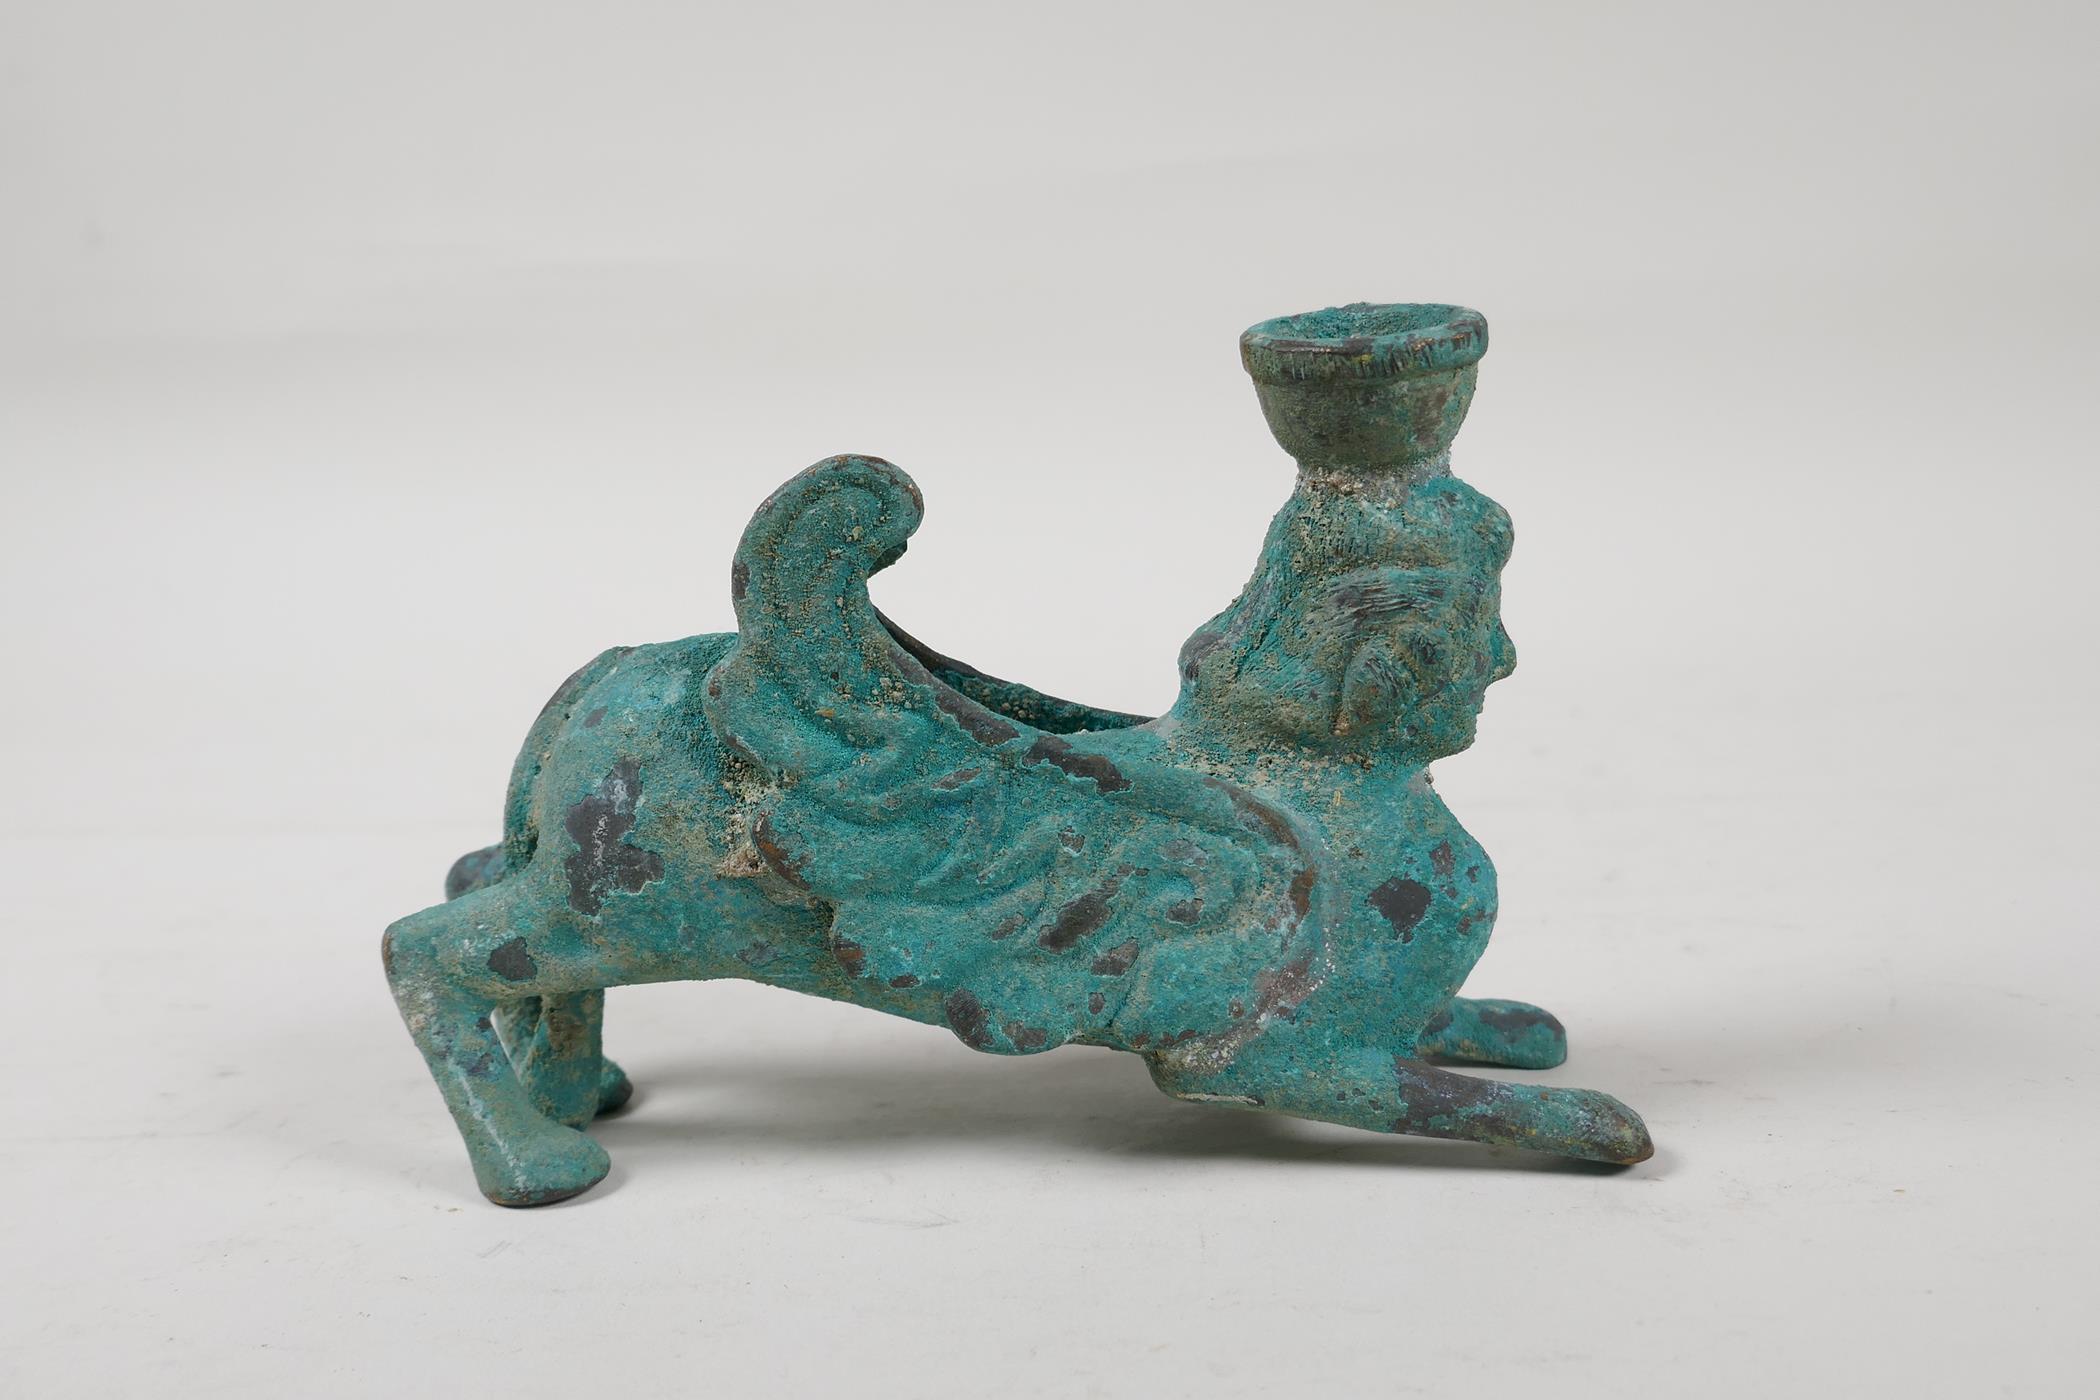 An antique bronze candlestick in the form of a Harpy, with verdigris patina, 5½" long - Image 2 of 5